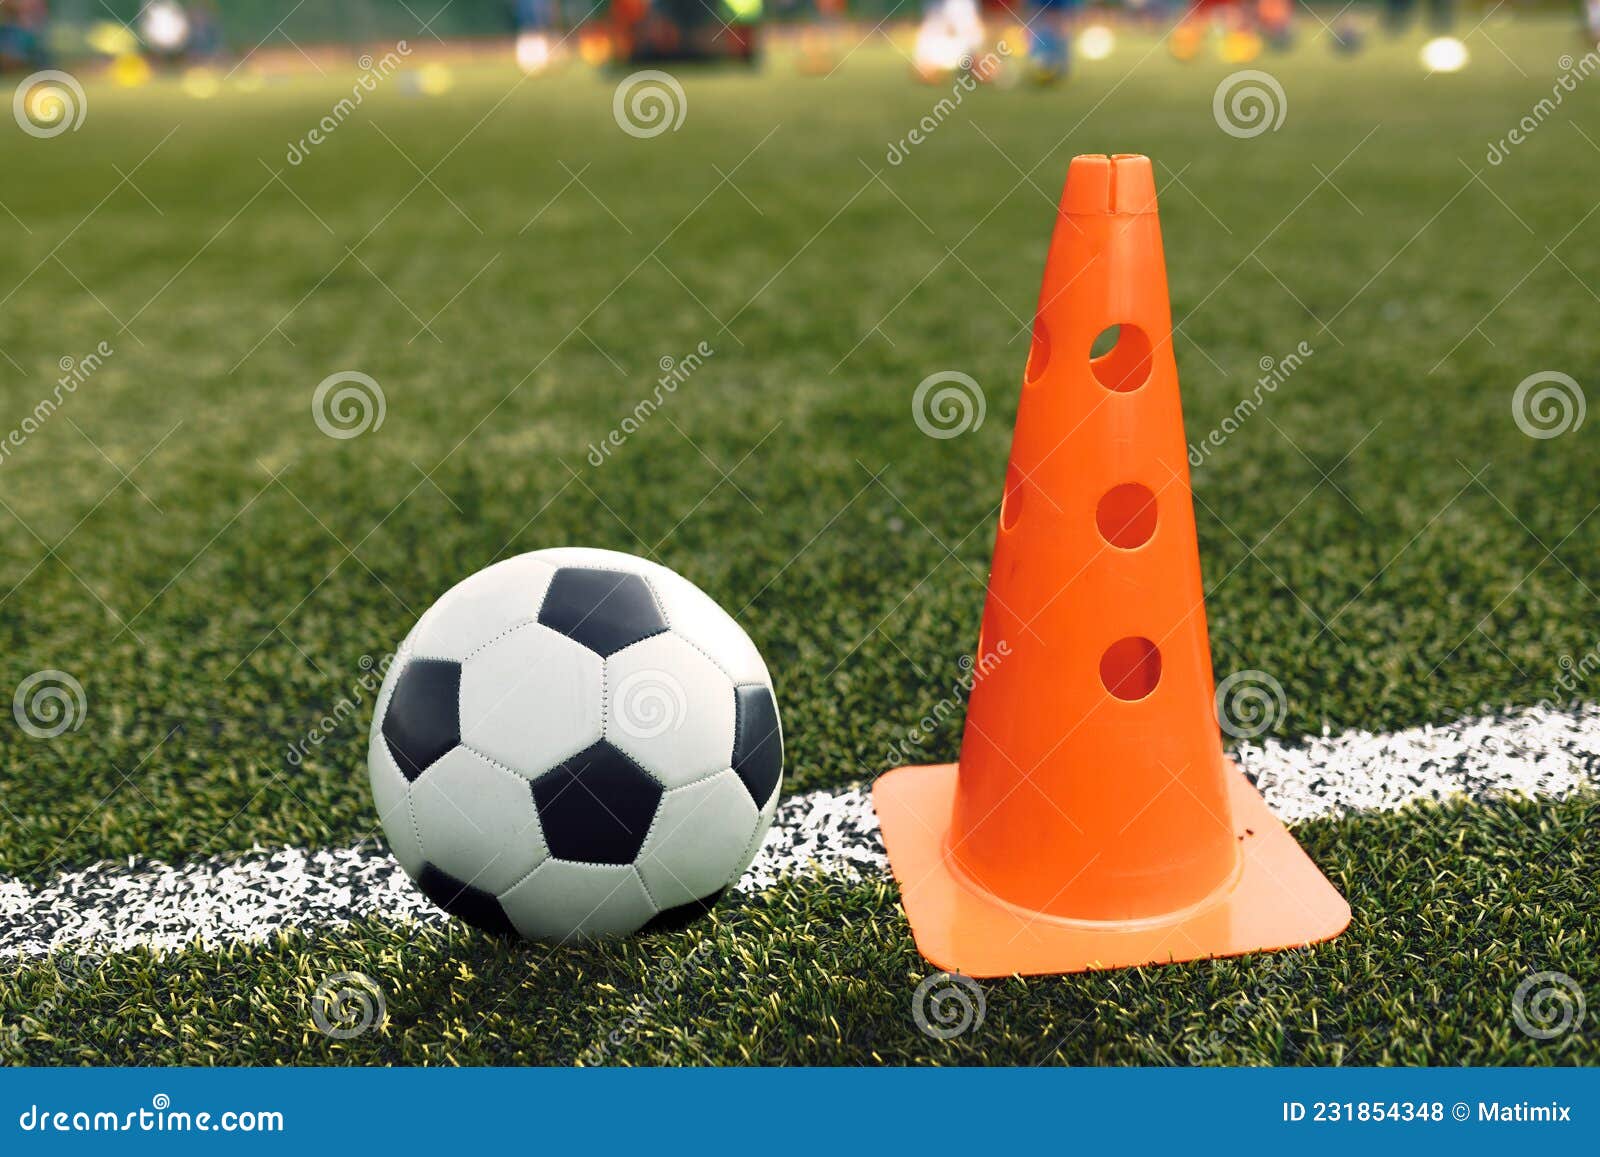 Soccer Ball and Training Cone Lying on Football Pitch Sideline